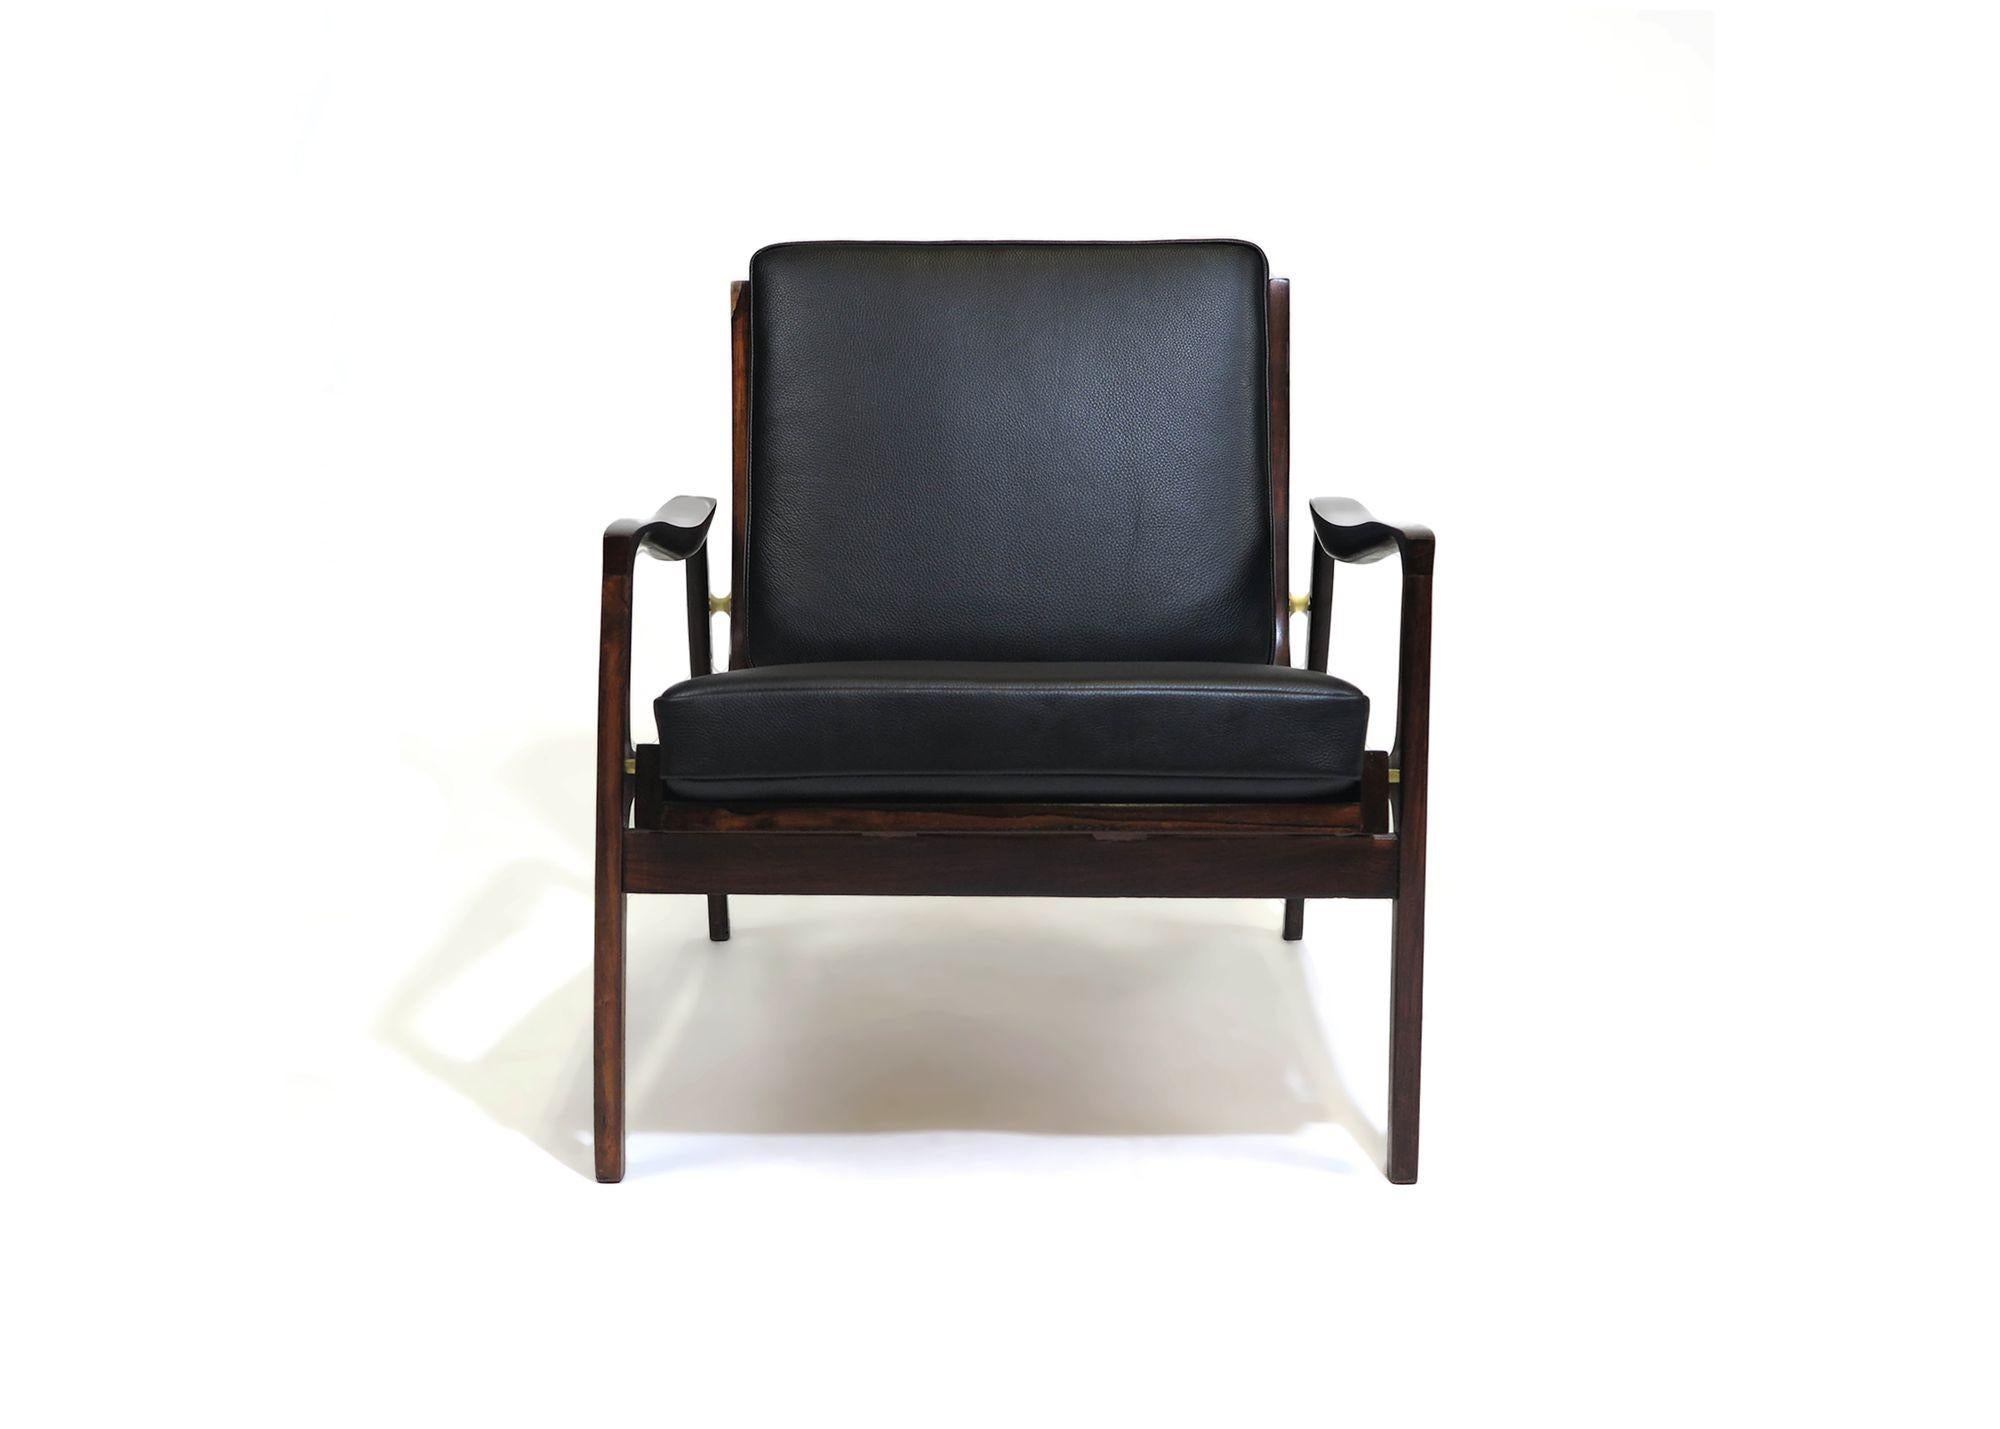 Liceu de Artes e Officios Brazilian Rosewood Lounge Chairs In Good Condition For Sale In Oakland, CA